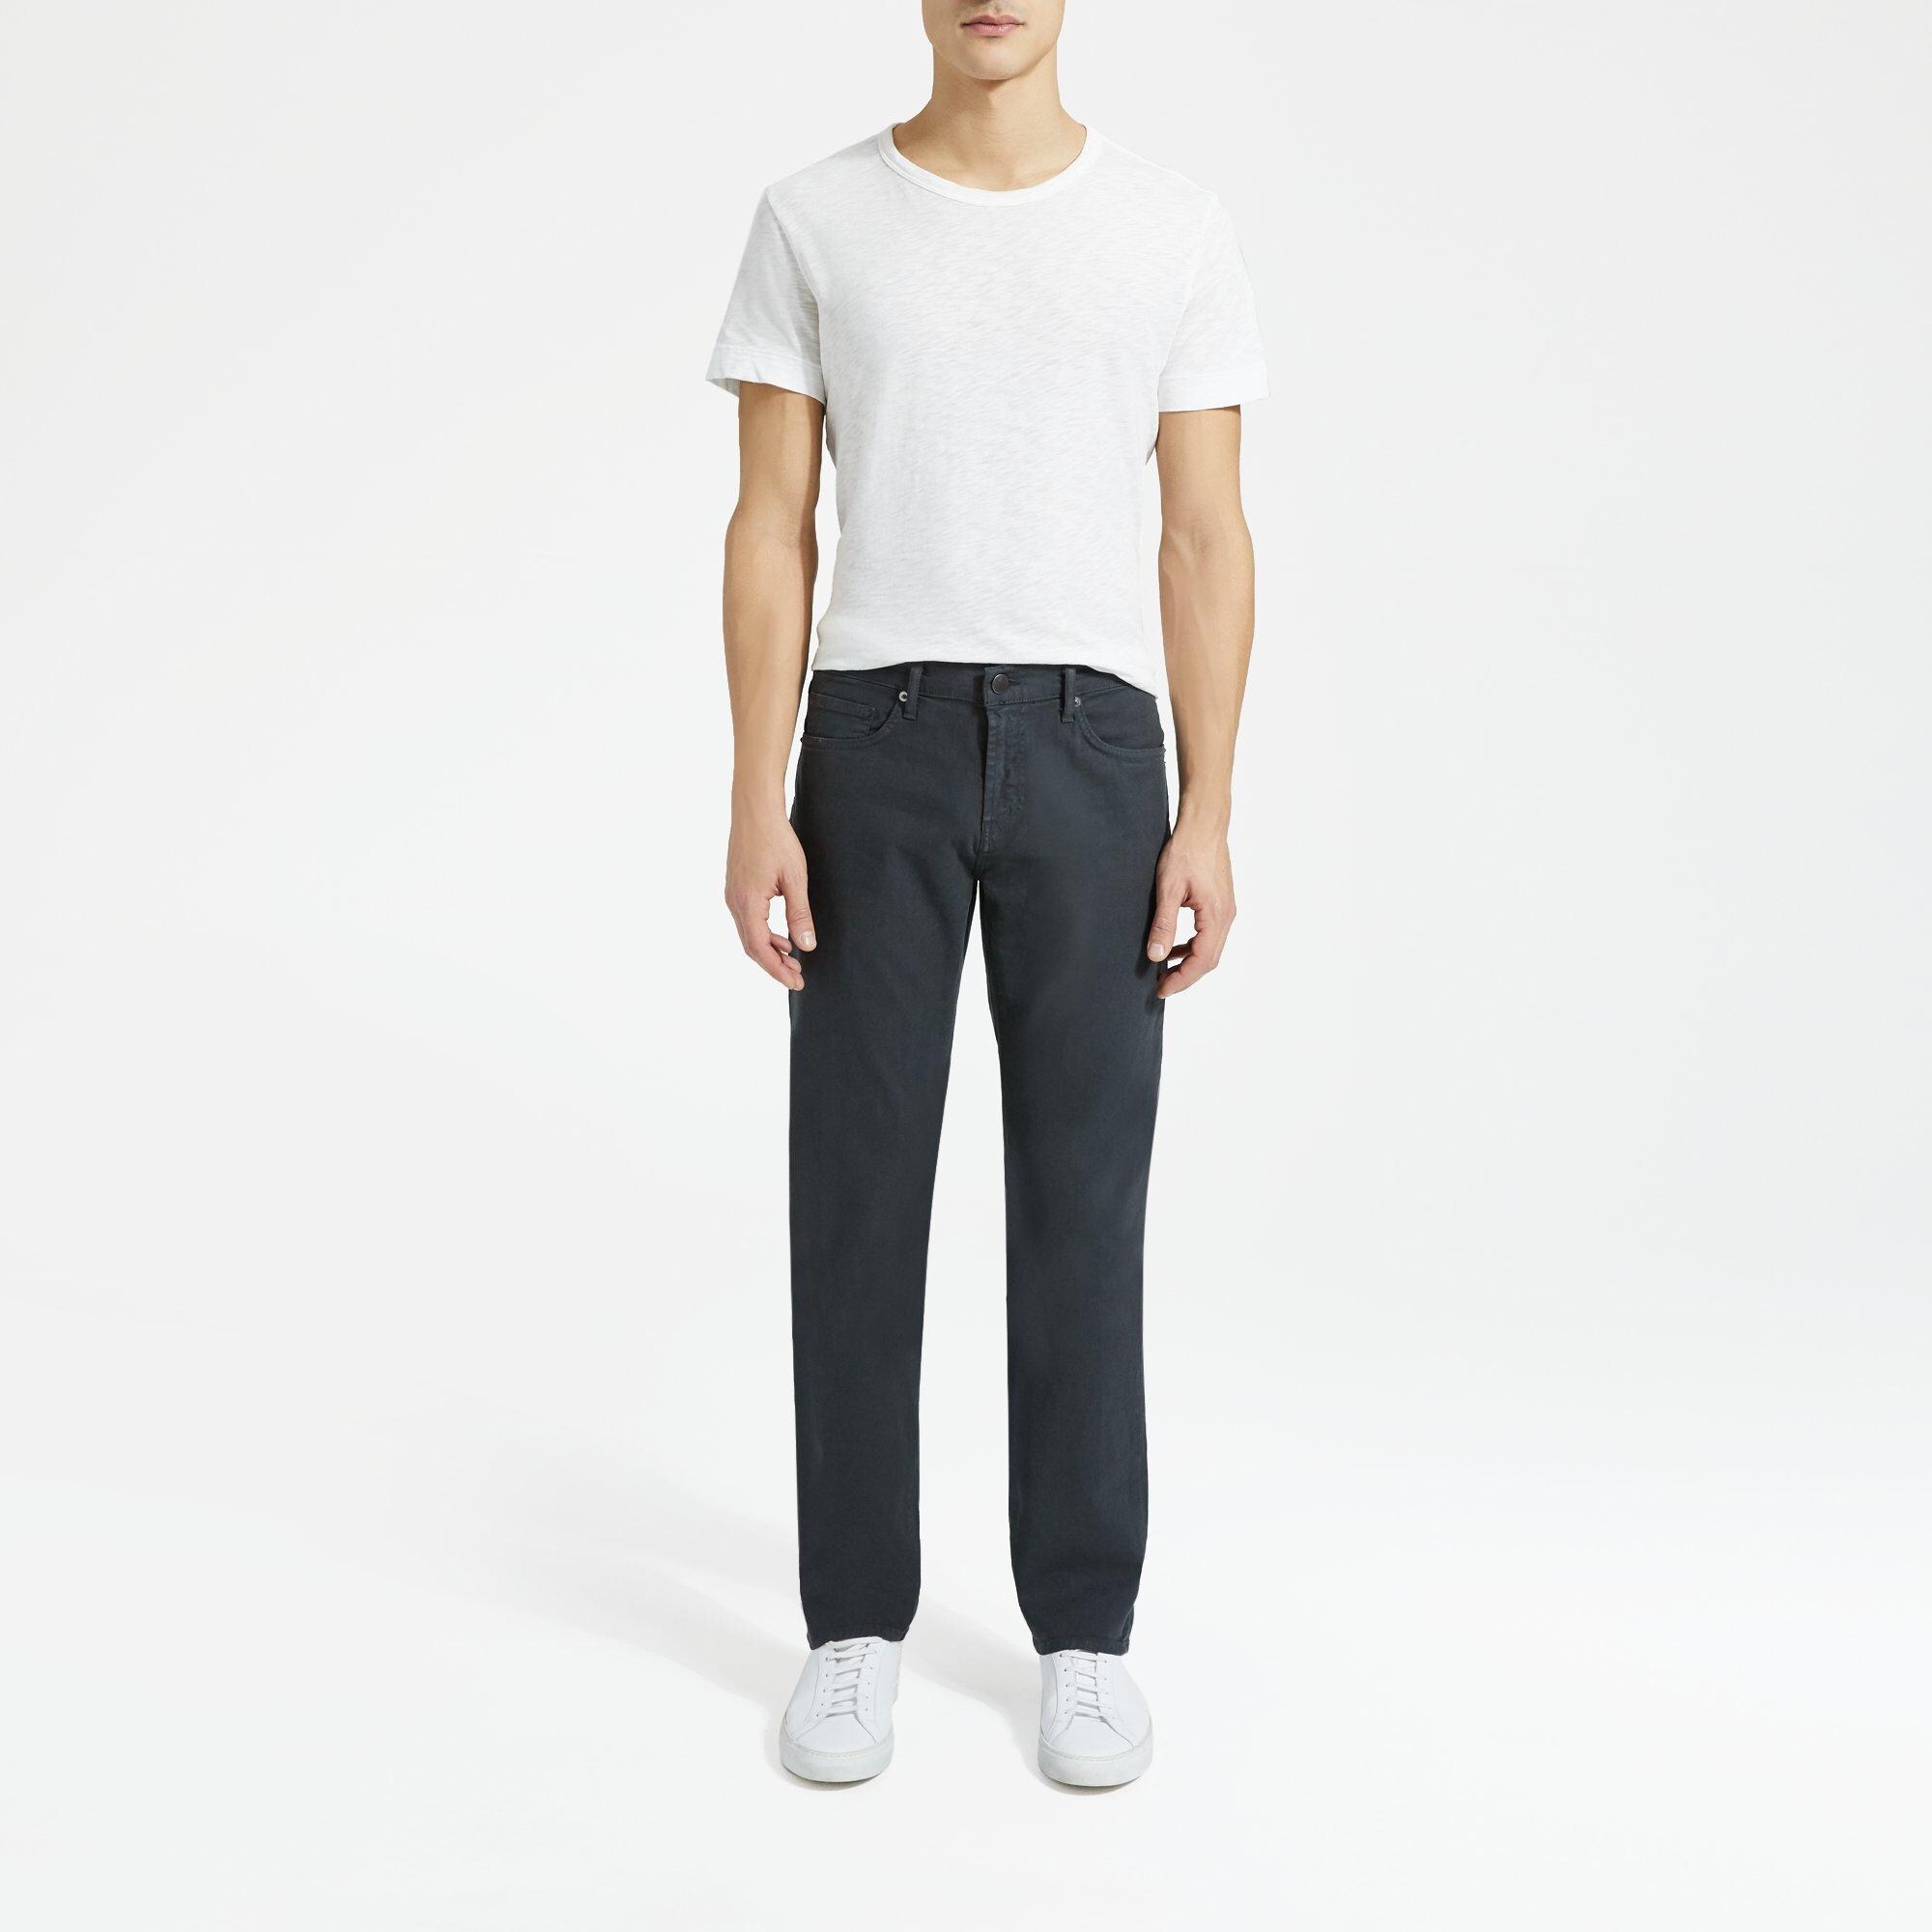 Theory Official Site  J Brand Kane Straight-Leg Jean